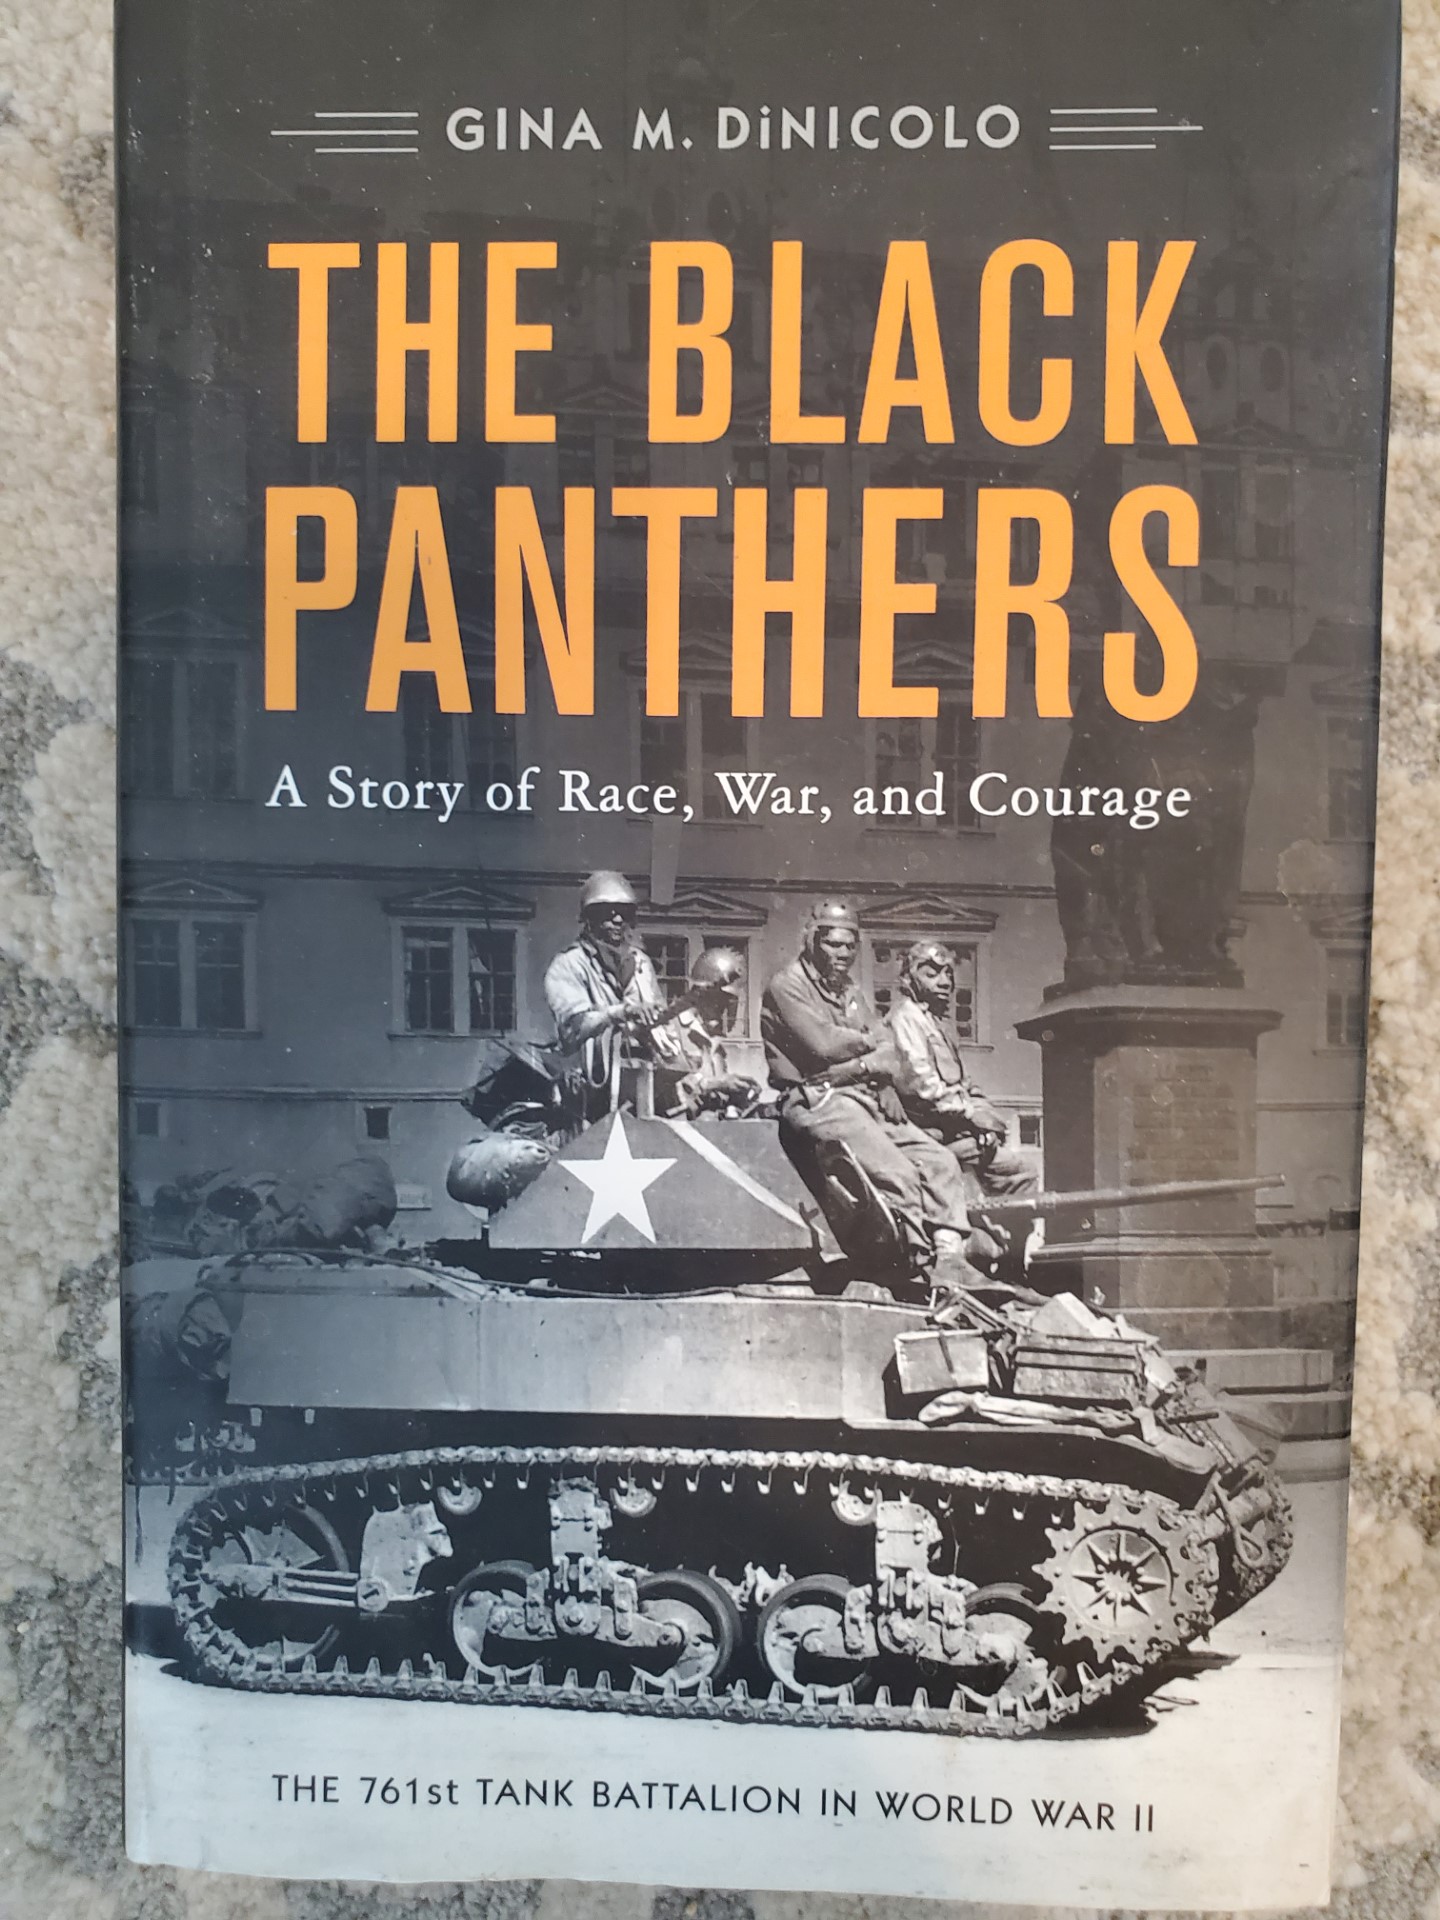 Image of book cover "The Black Panthers" 